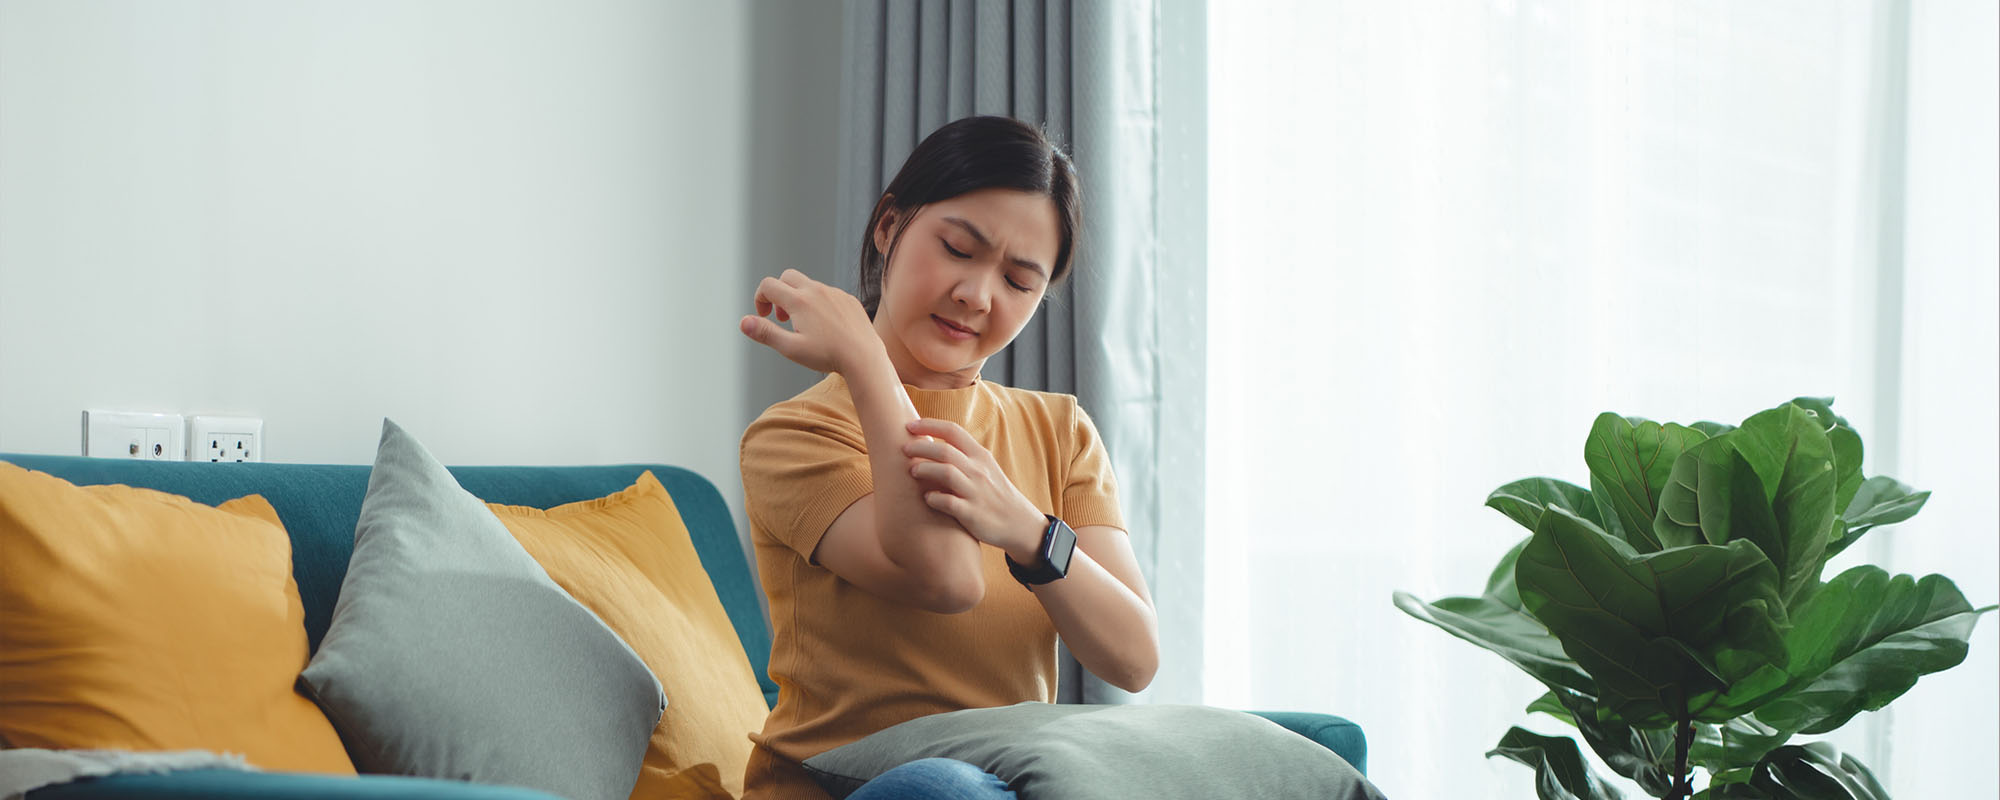 Woman sitting on a couch scratching her arm